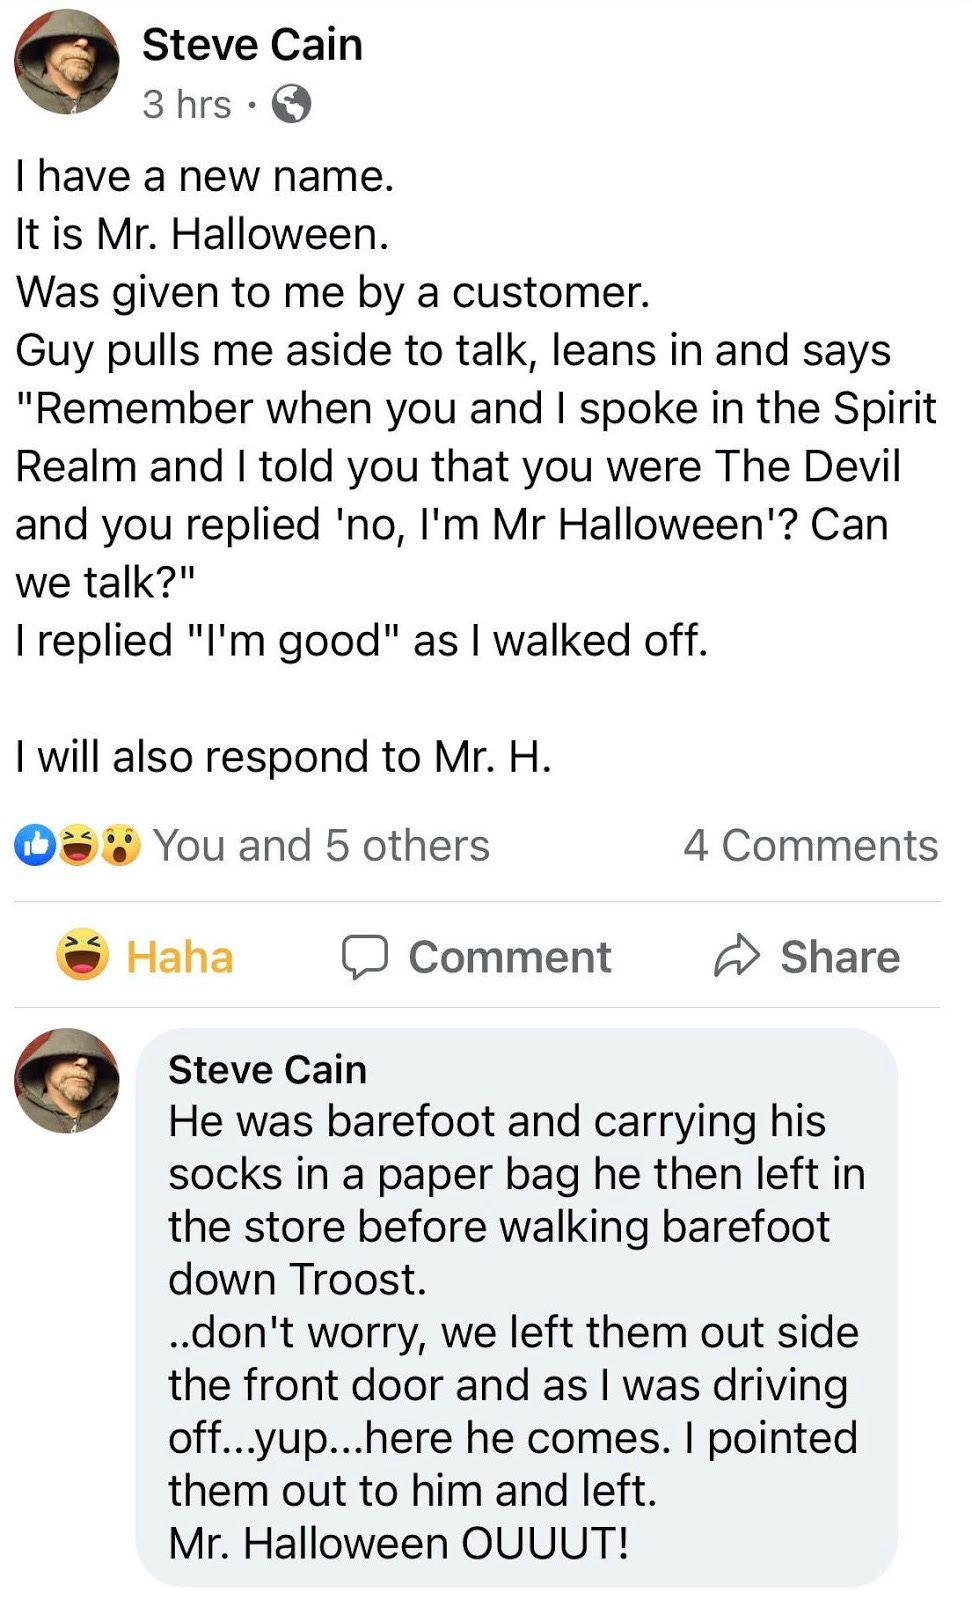 I have a new name. I am Mr. Halloween. Was given to me by a customer. Guy pulls me aside to talk, leans in and says "Remember when you and I spoke in the Spirit Realm and I told you that you were The Devil and you replied 'no, I'm Mr Halloween'? Can we talk?" I replied "I'm good" as I walked off. I will also respond to Mr. H. He was barefoot and carrying his socks in a paper bag he then left in the store before walking barefoot down Troost. ..don't worry, we left them out side the front door and as I was driving off...yup...here he comes. I pointed them out to him and left. Mr. Halloween OUUUT!